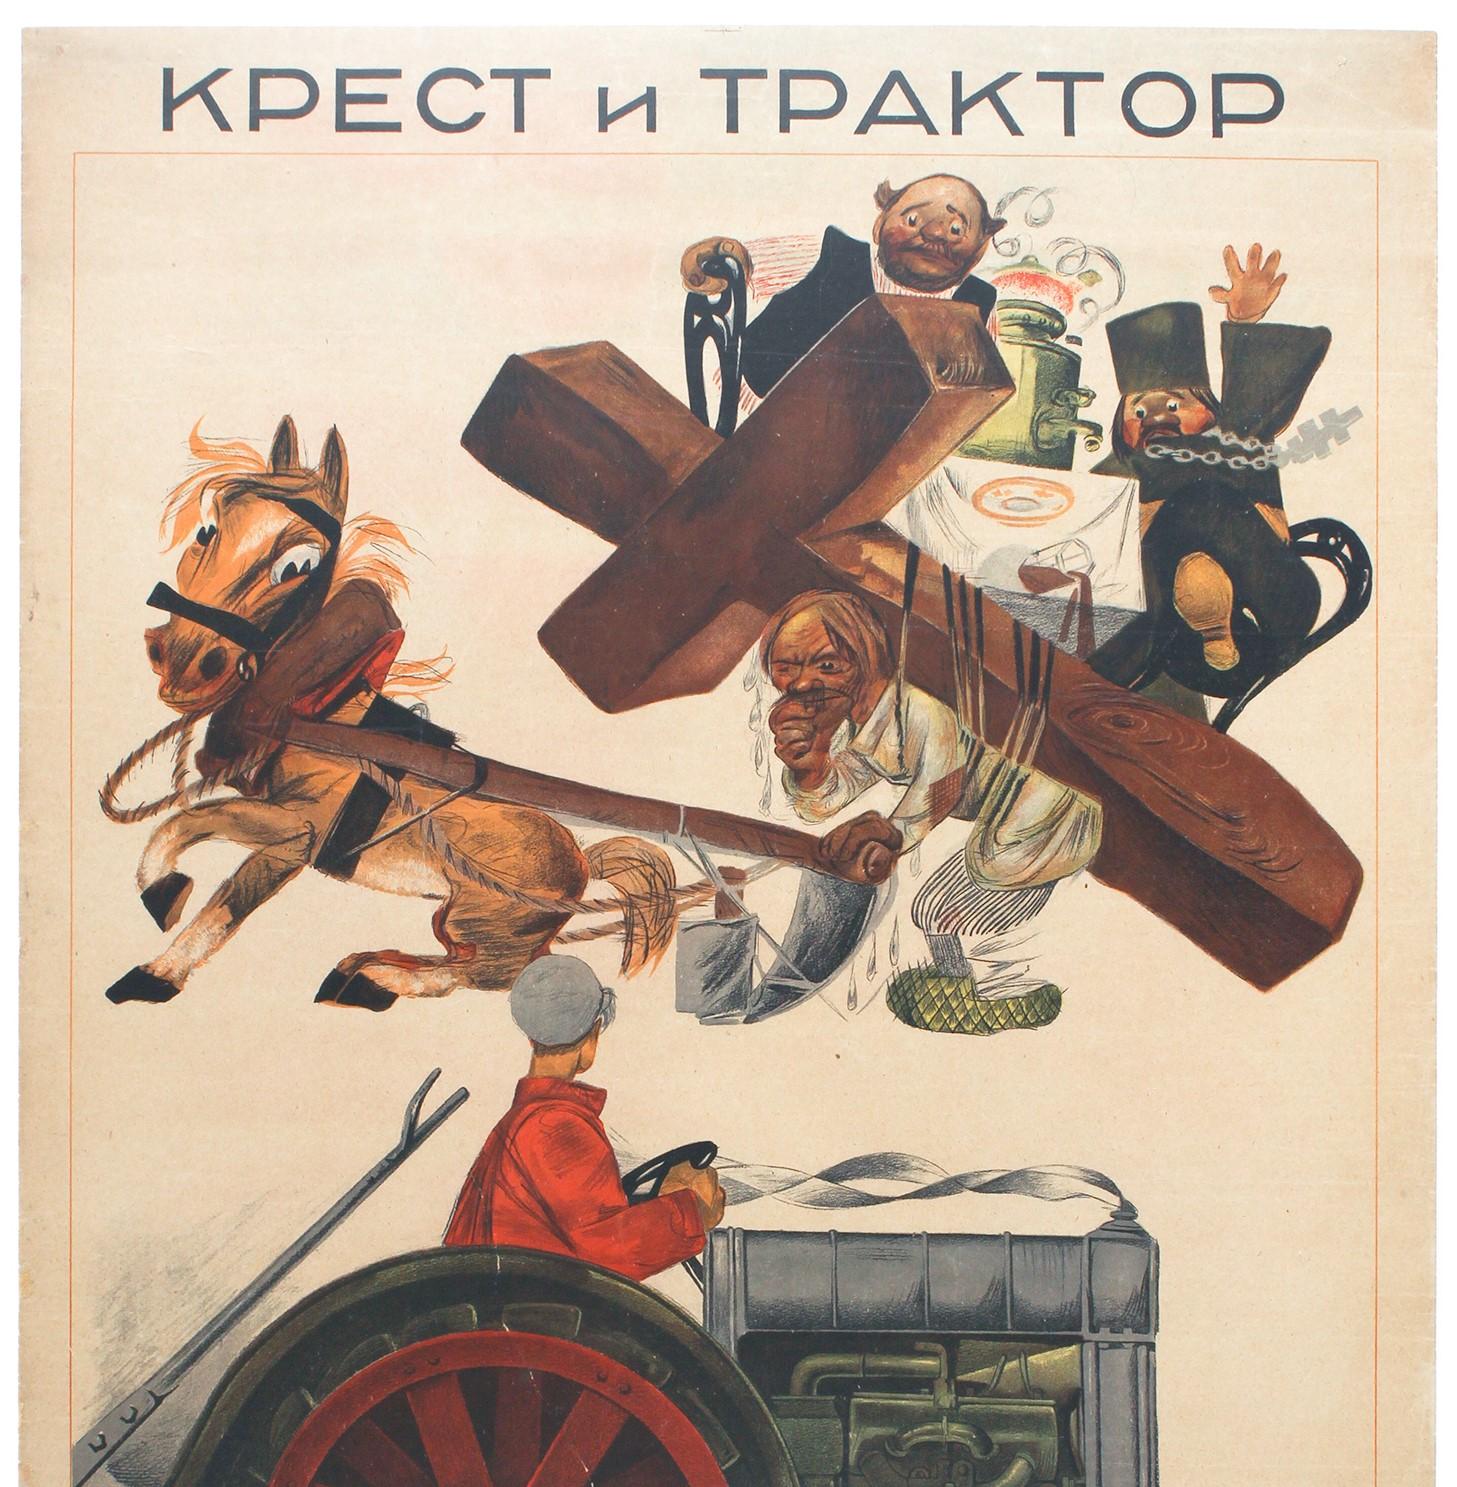 Original vintage anti-religious communist propaganda poster entitled Крест и Трактор / Cross and Tractor featuring a cartoon style design by Mikhail Cheremnykh (1890-1962) based on a poem by Demyan Bedny (1883-1945) about peasant exploitation by the